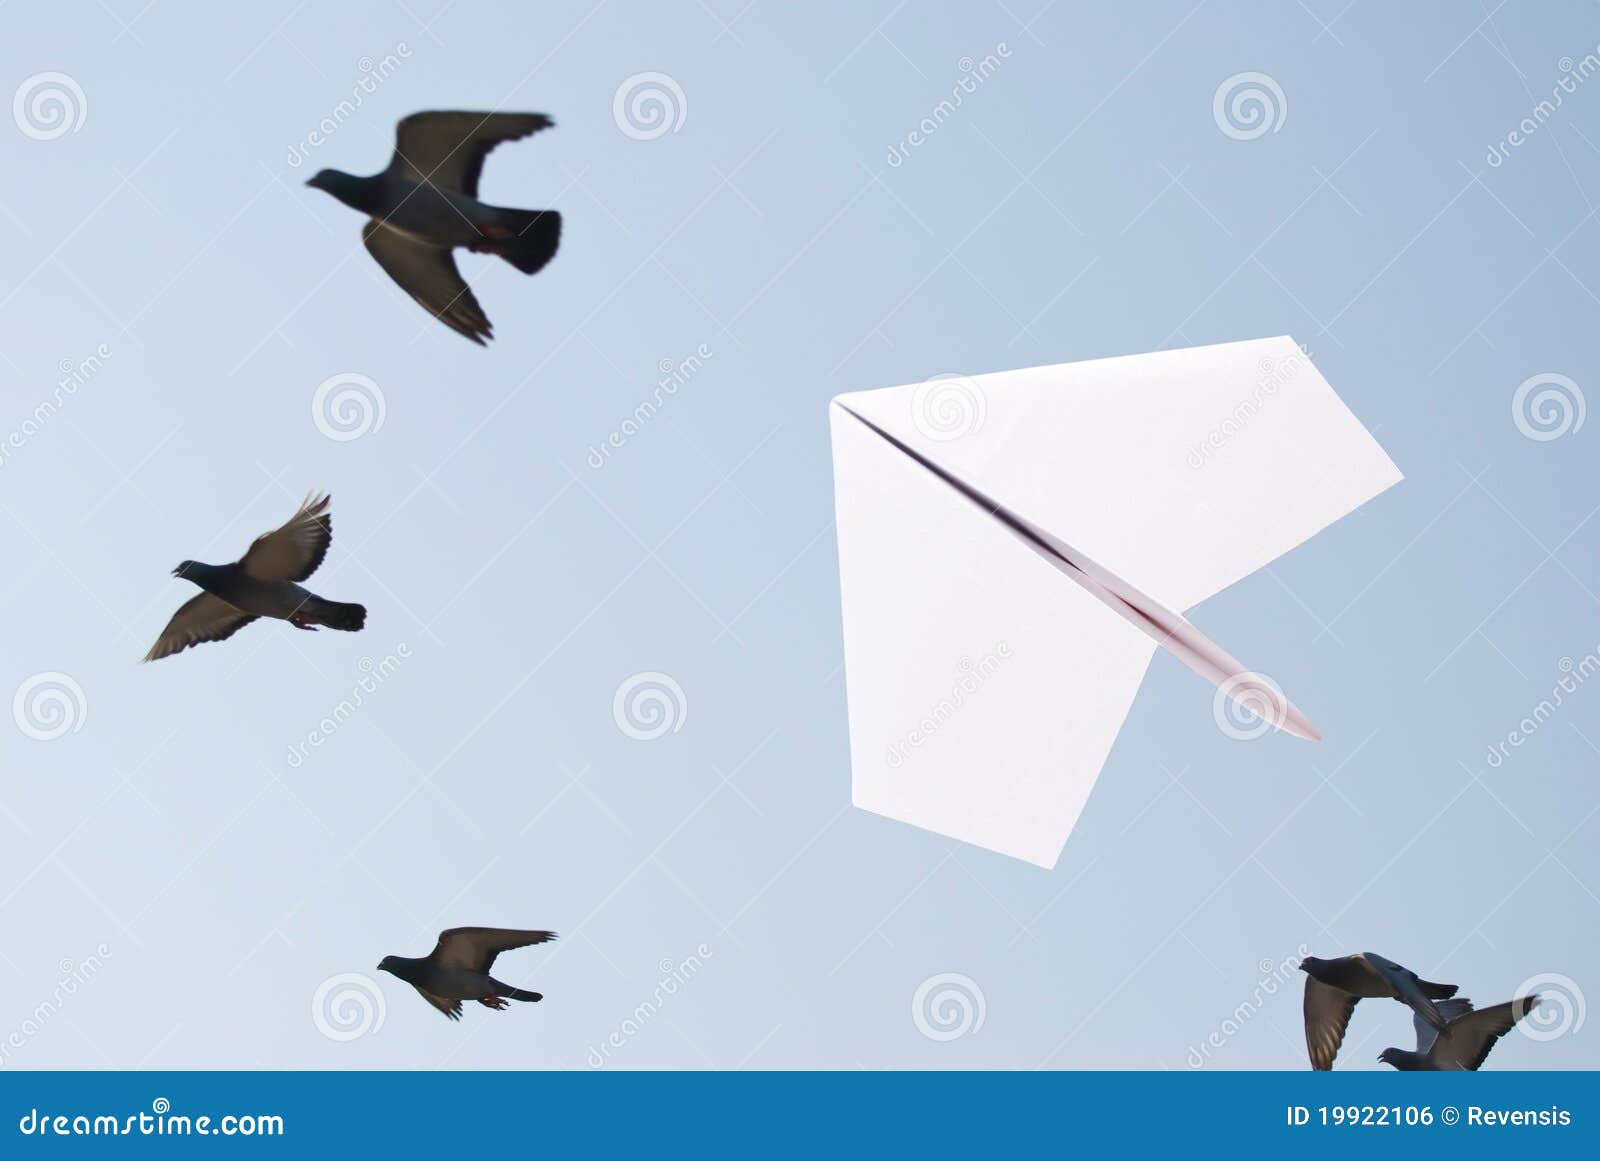 Paper Airplane Flying with Birds Stock Photo - Image of hand, game ...